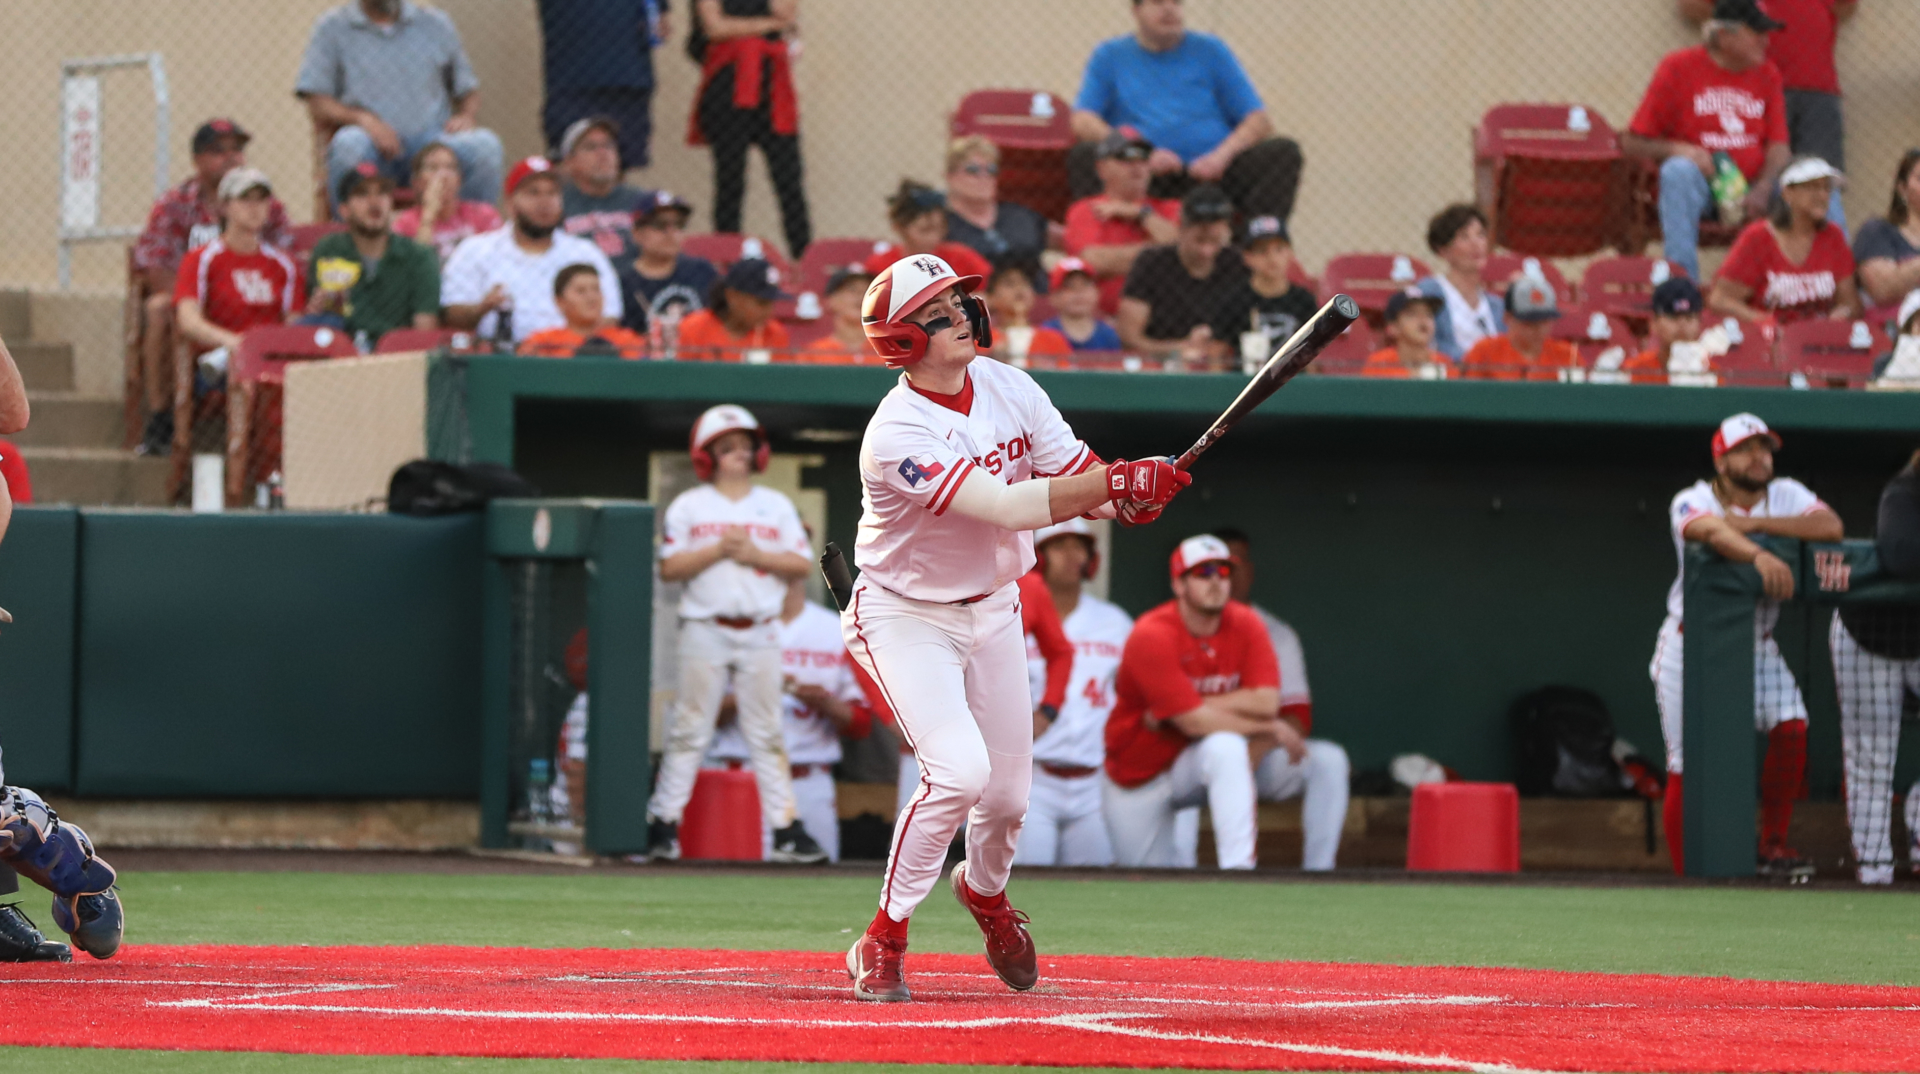 Catcher Anthony Tulimero delivered a walk-off blast on Saturday to lift UH baseball past Memphis. | Sean Thomas/The Cougar